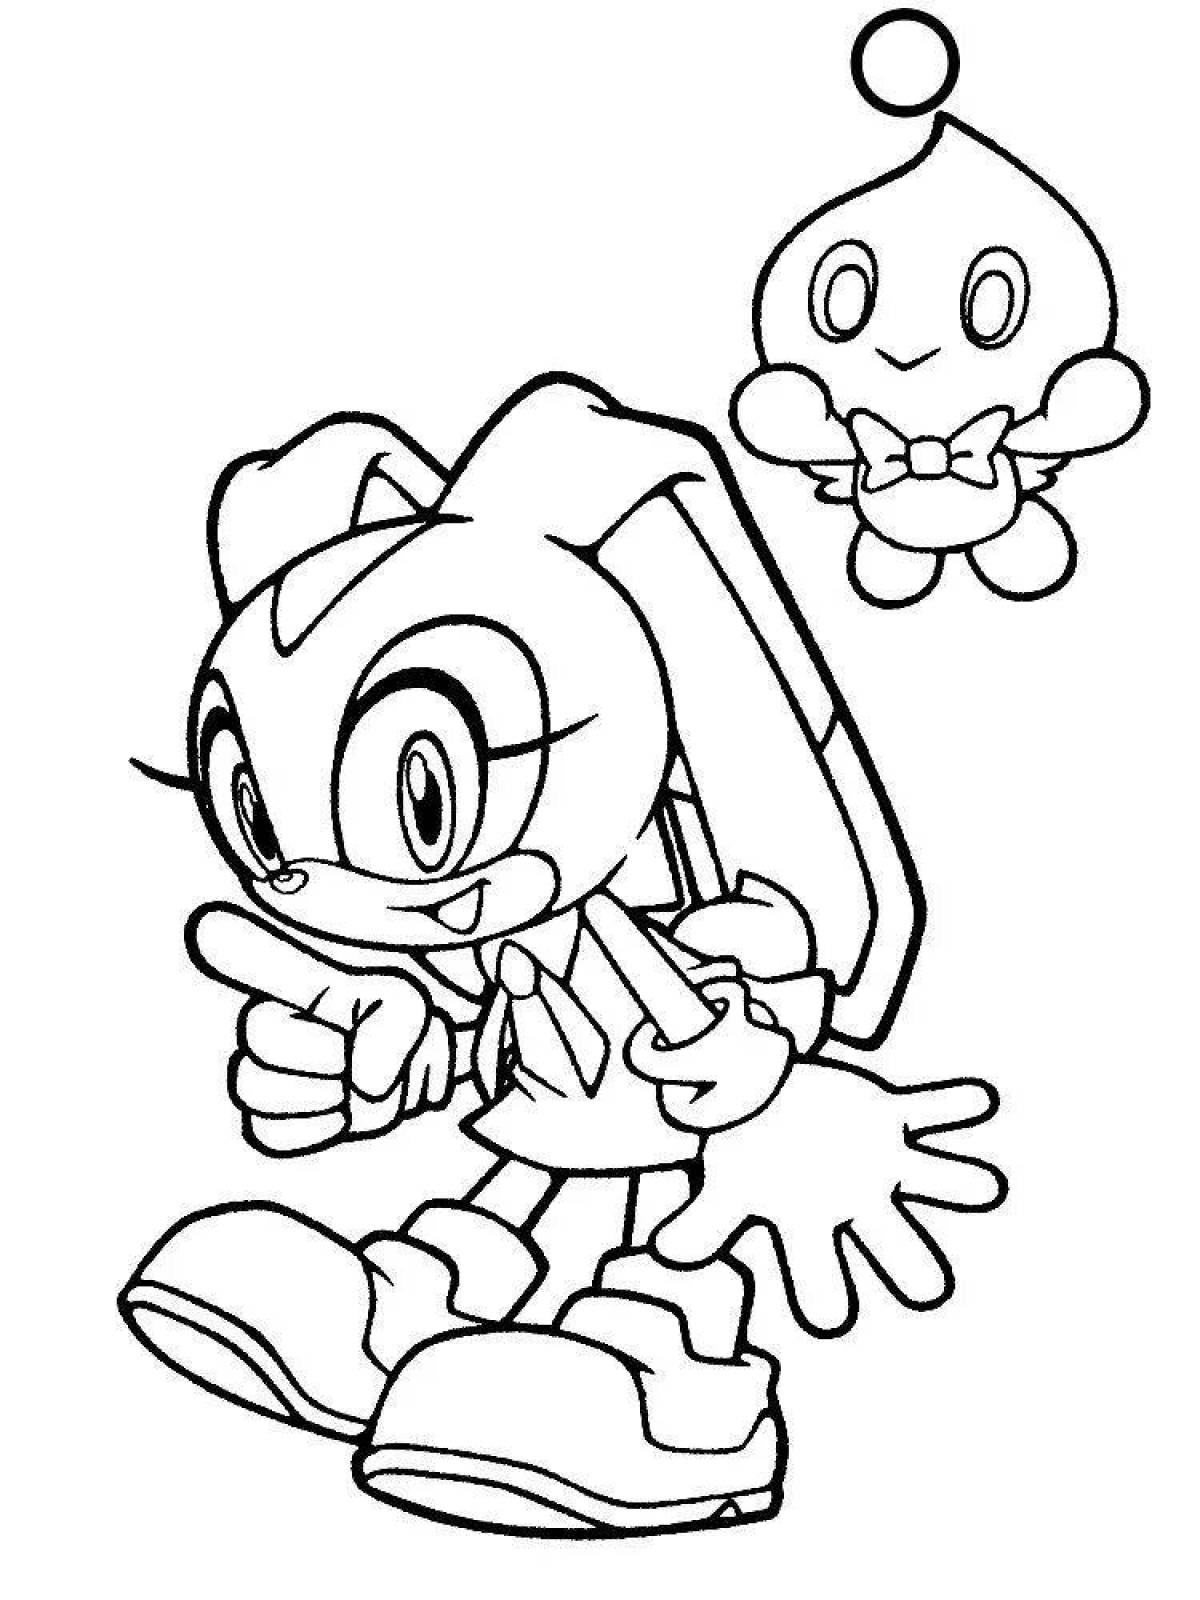 Exciting sonic girl coloring book